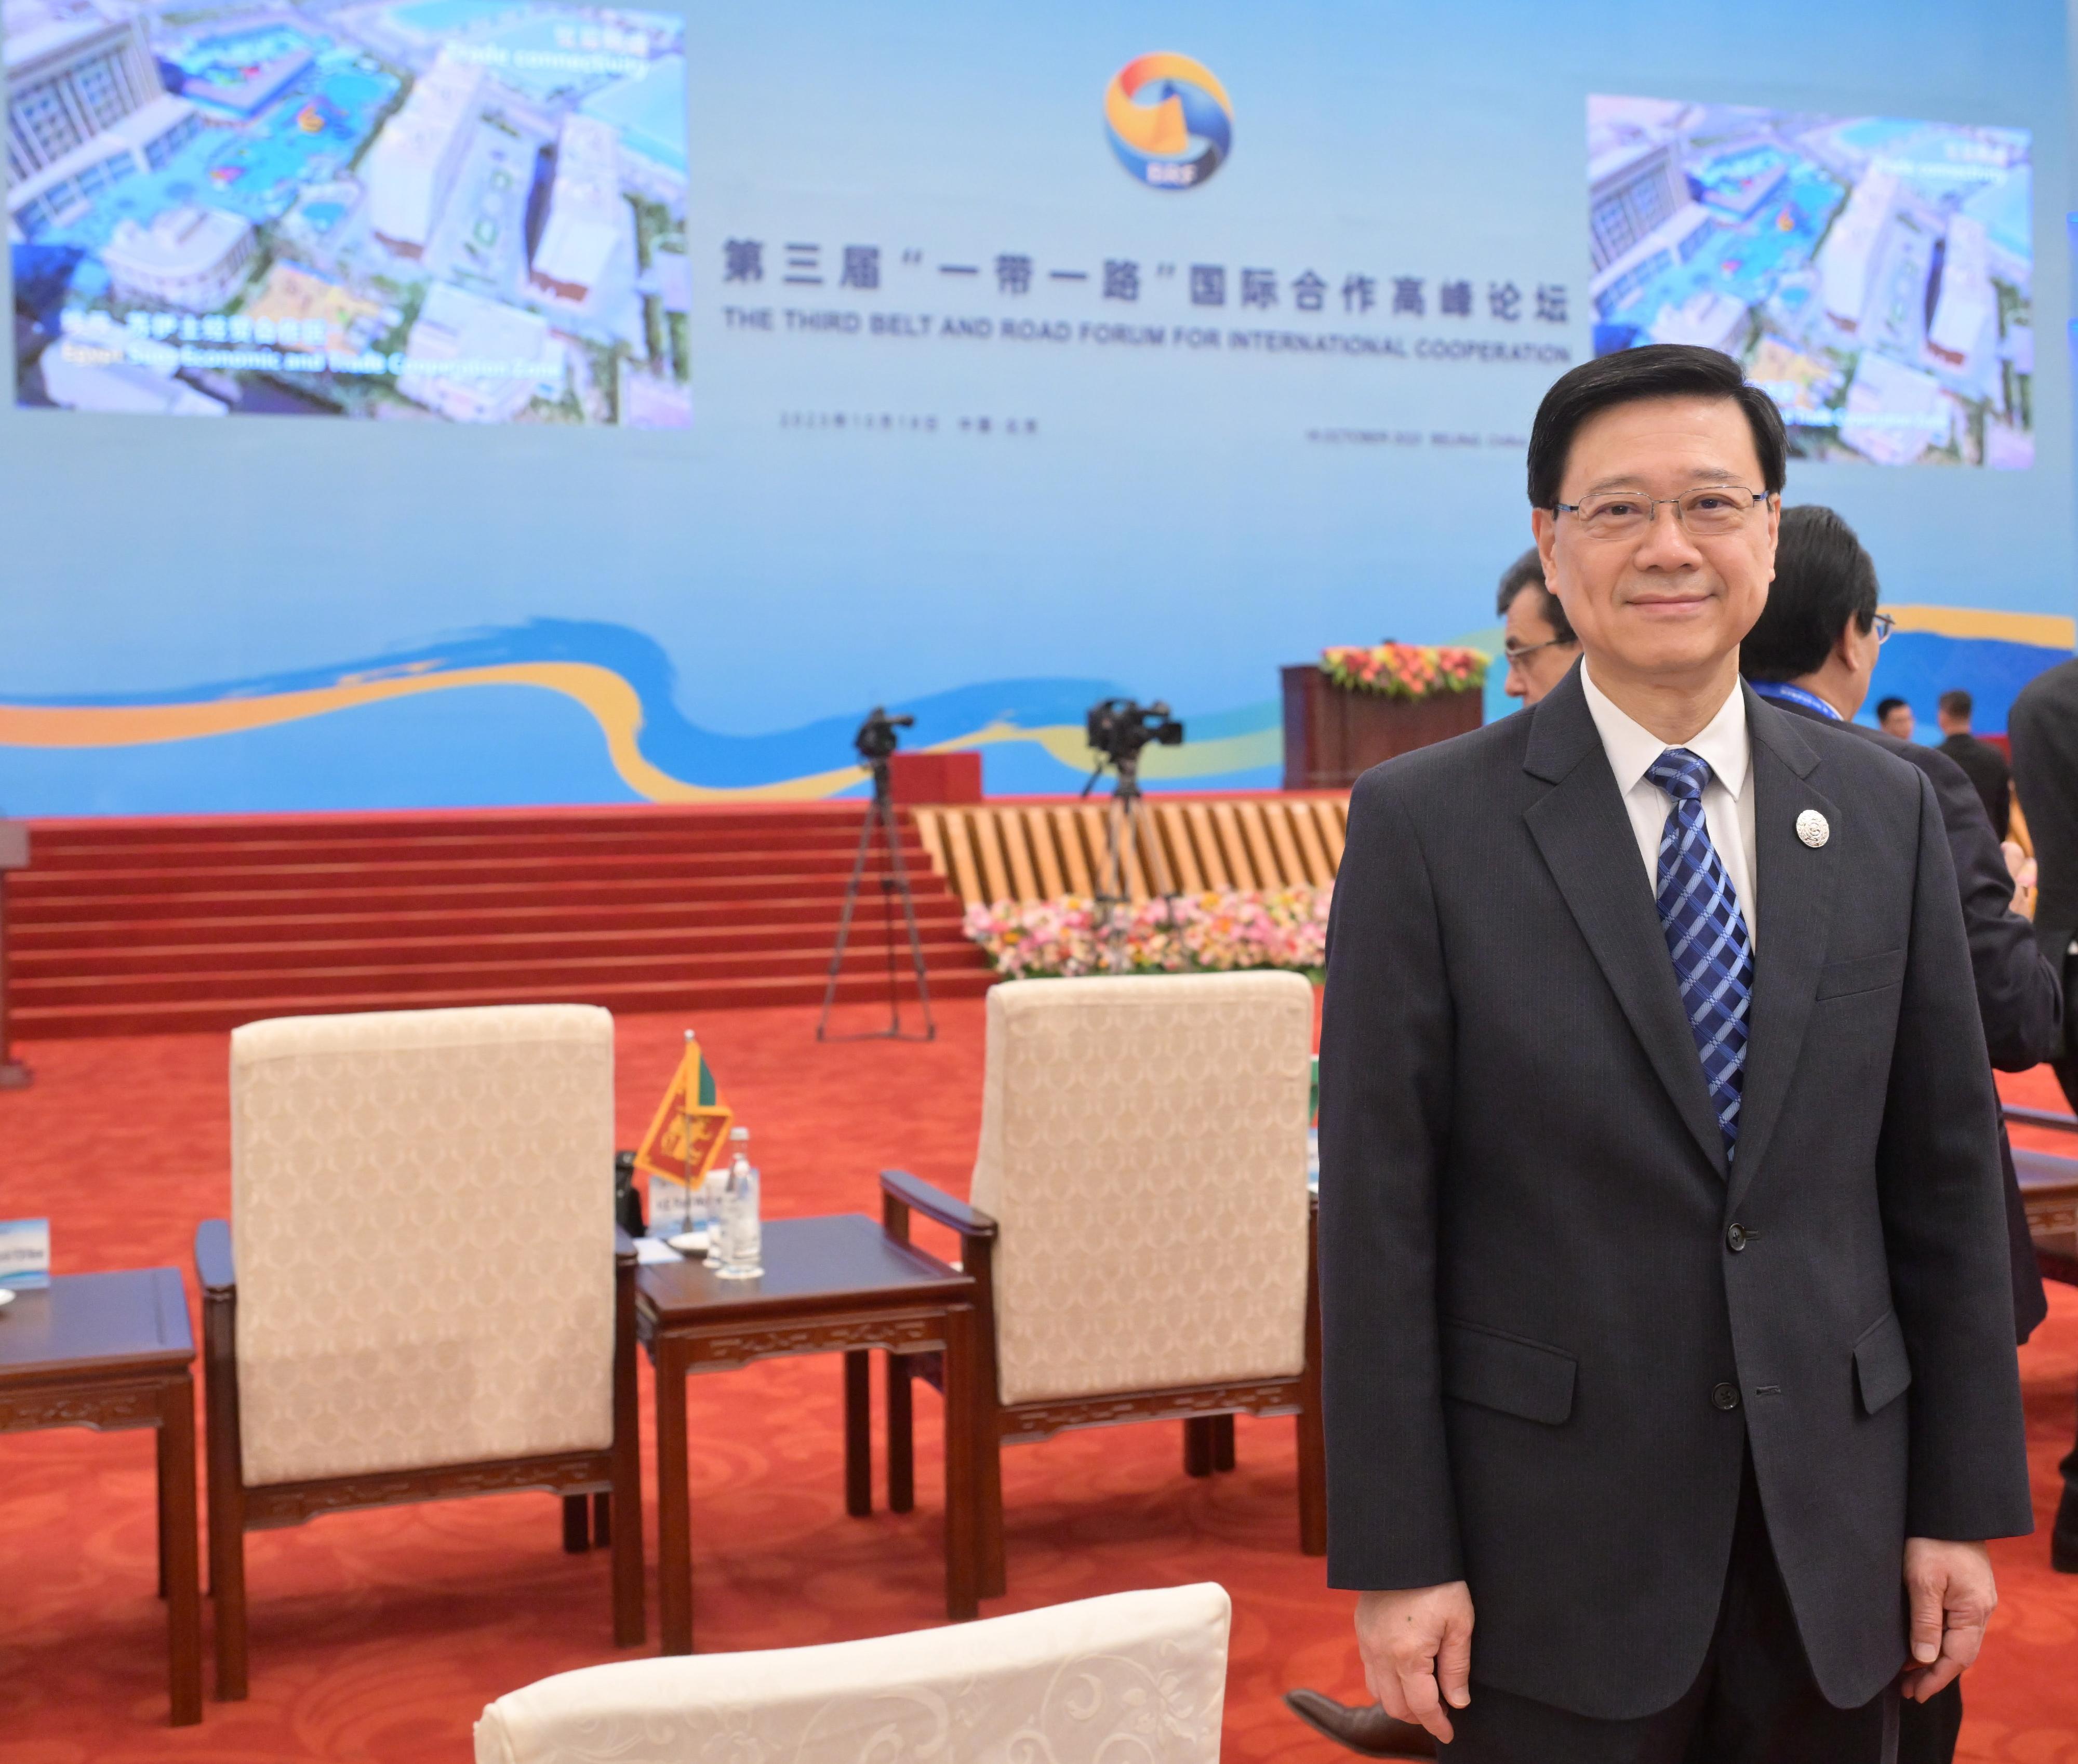 The Chief Executive, Mr John Lee, led a high-level Hong Kong Special Administrative Region delegation comprising senior government officials and members of various sectors to participate in the third Belt and Road Forum for International Cooperation in Beijing today (October 18). Photo shows Mr Lee at the opening ceremony of the Forum this morning.